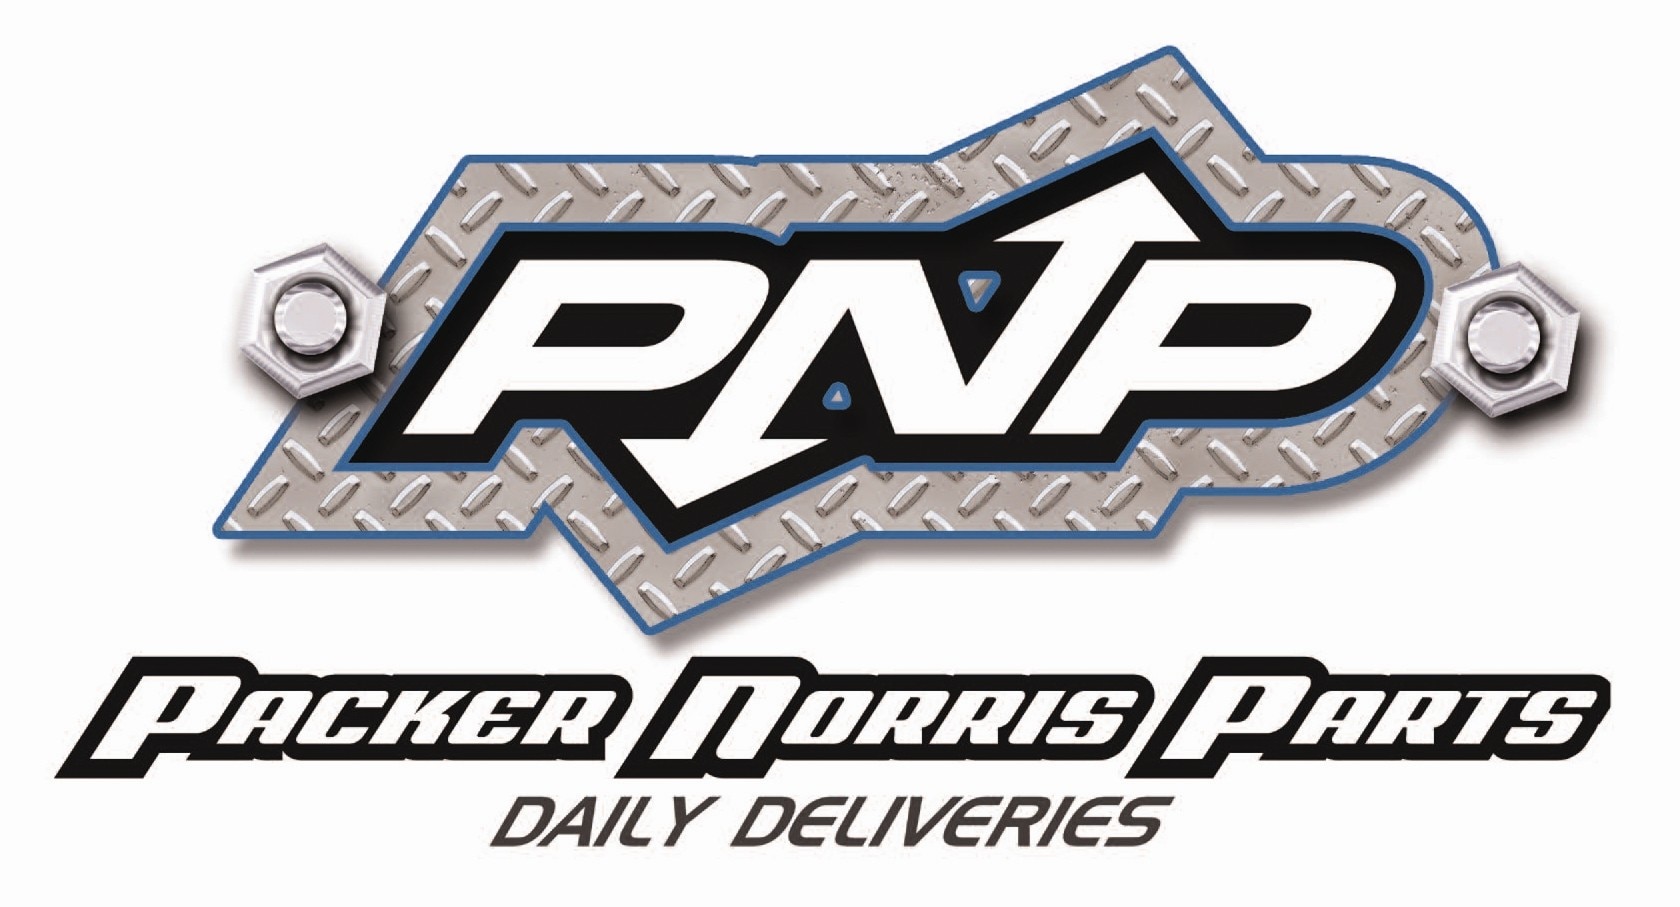 Packer norris ford parts #9